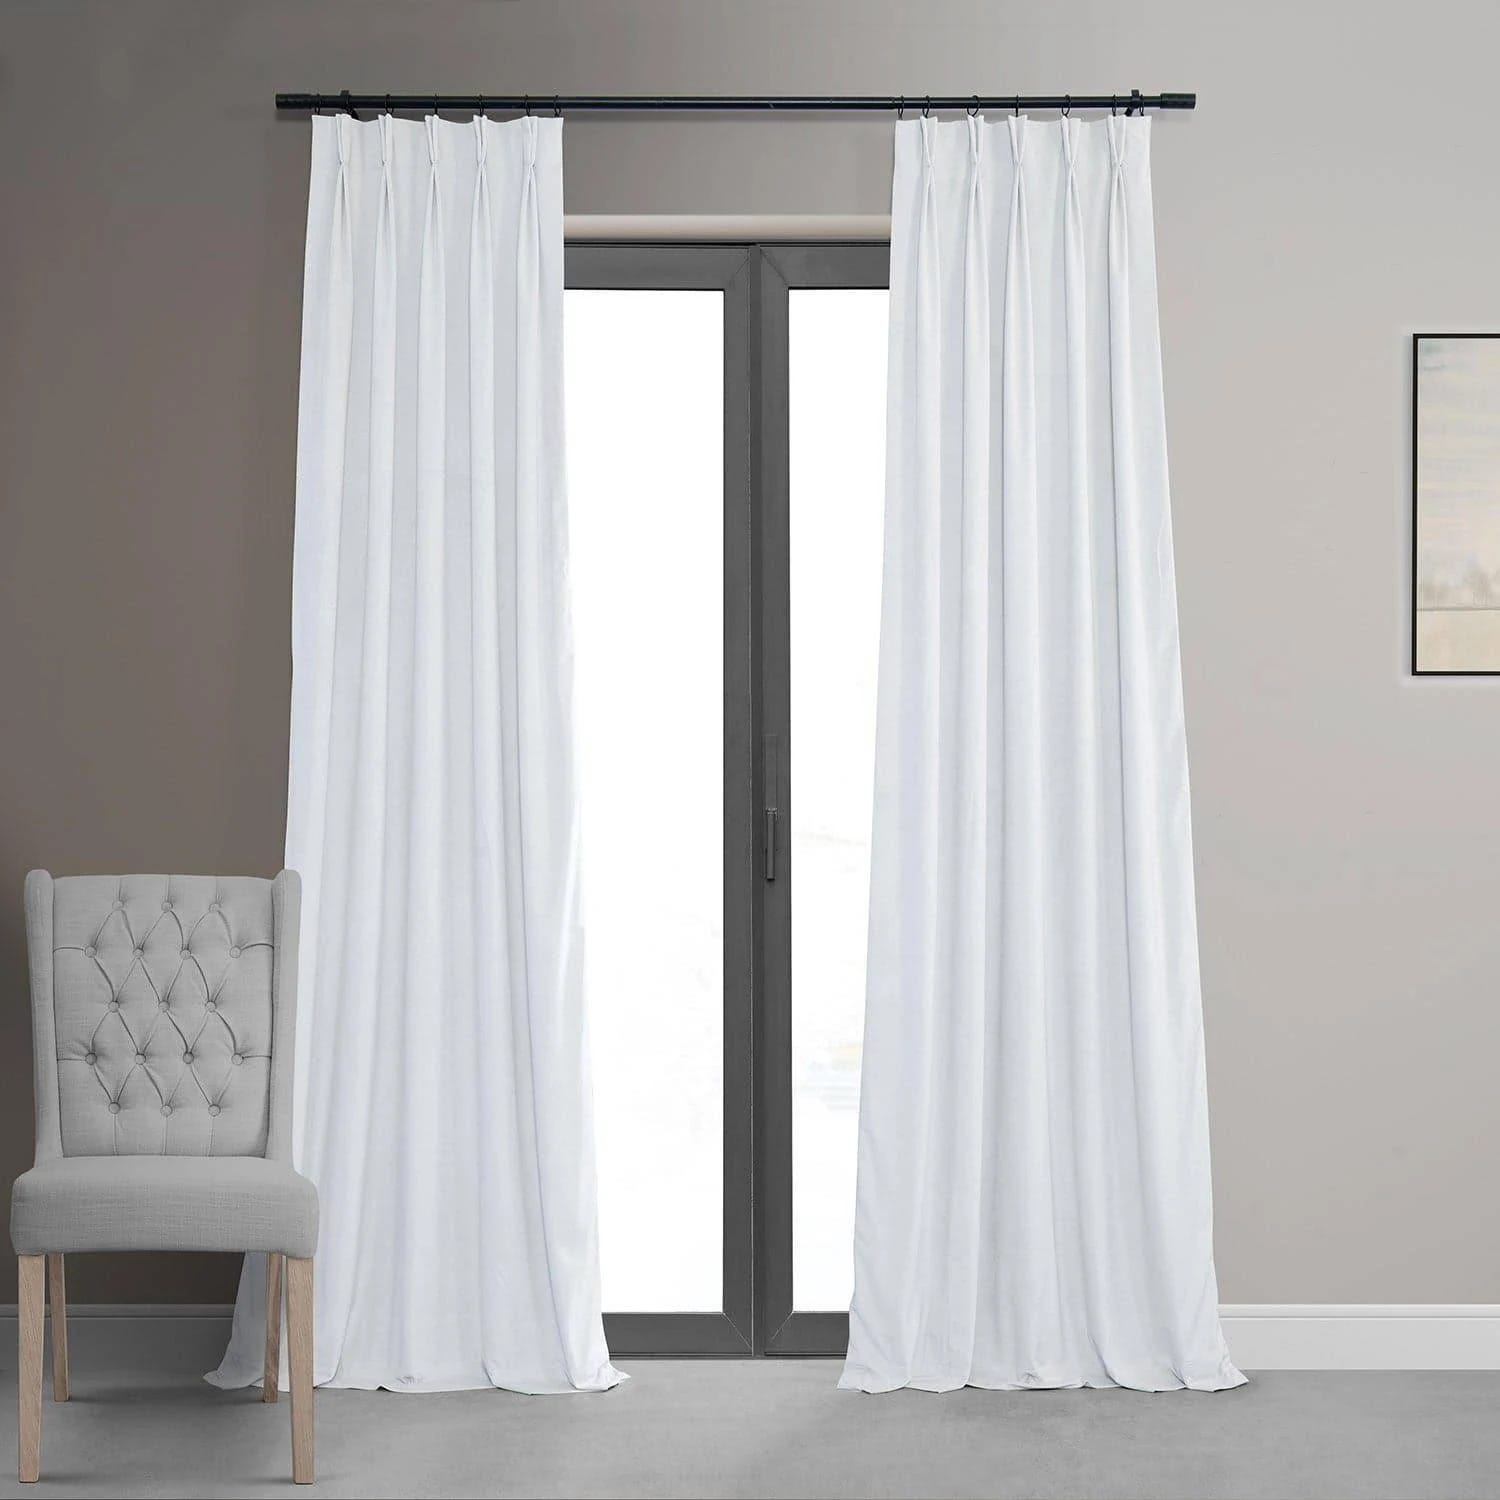 Luxurious White Velvet Blackout Curtains by Primary French Pleat | Image